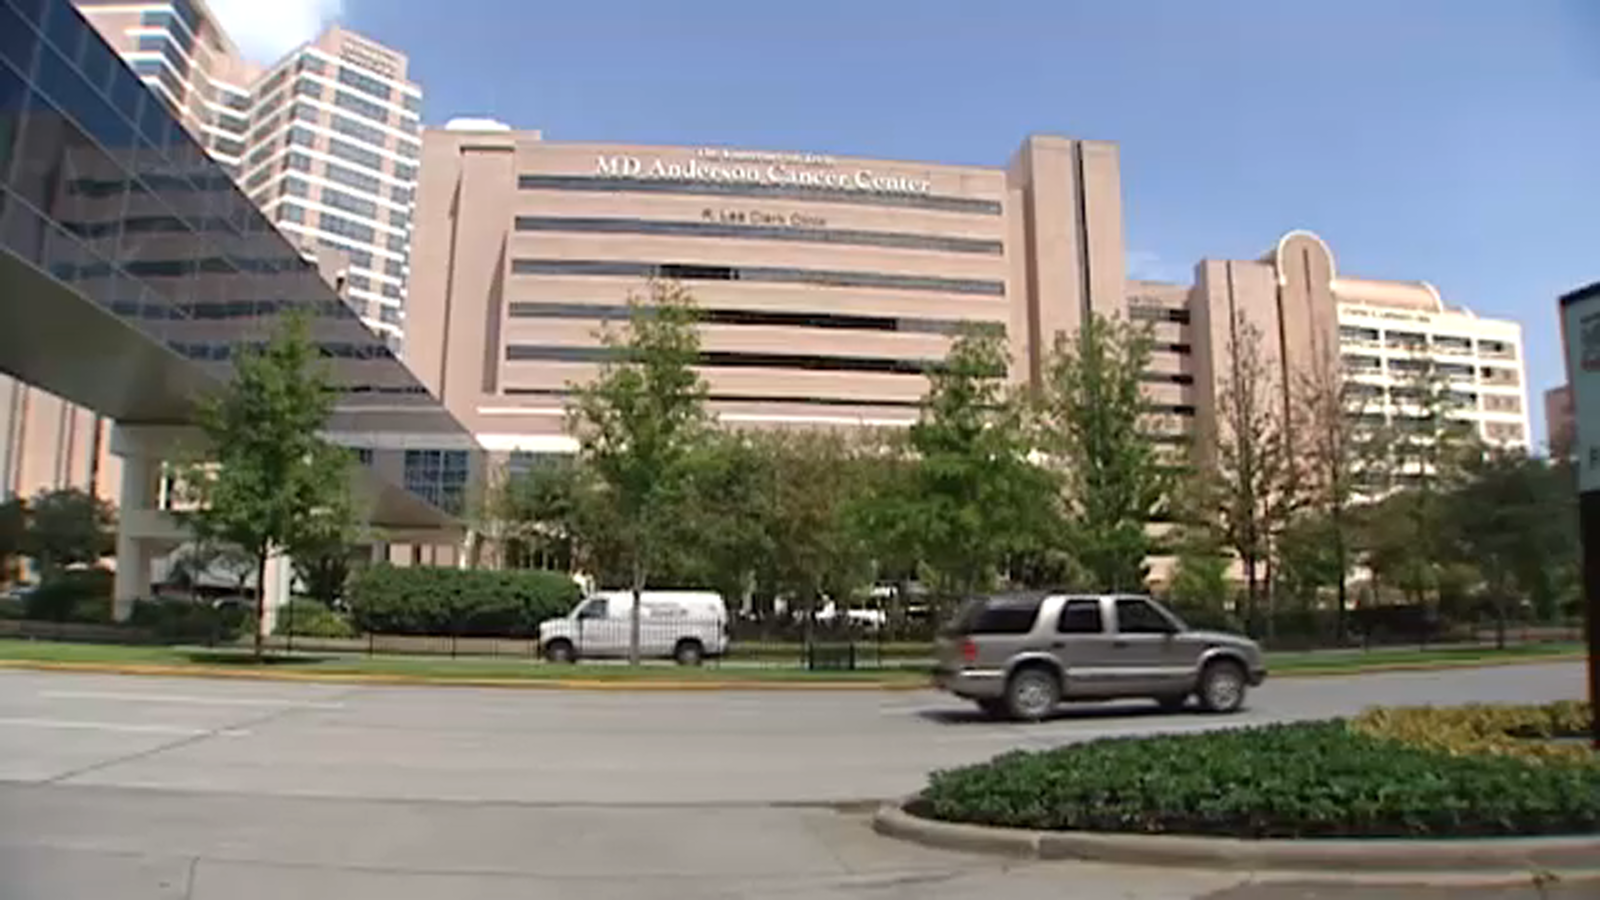 MD Anderson X-ray technician accused of assaulting patient during medical exam at Mays Clinic [Video]